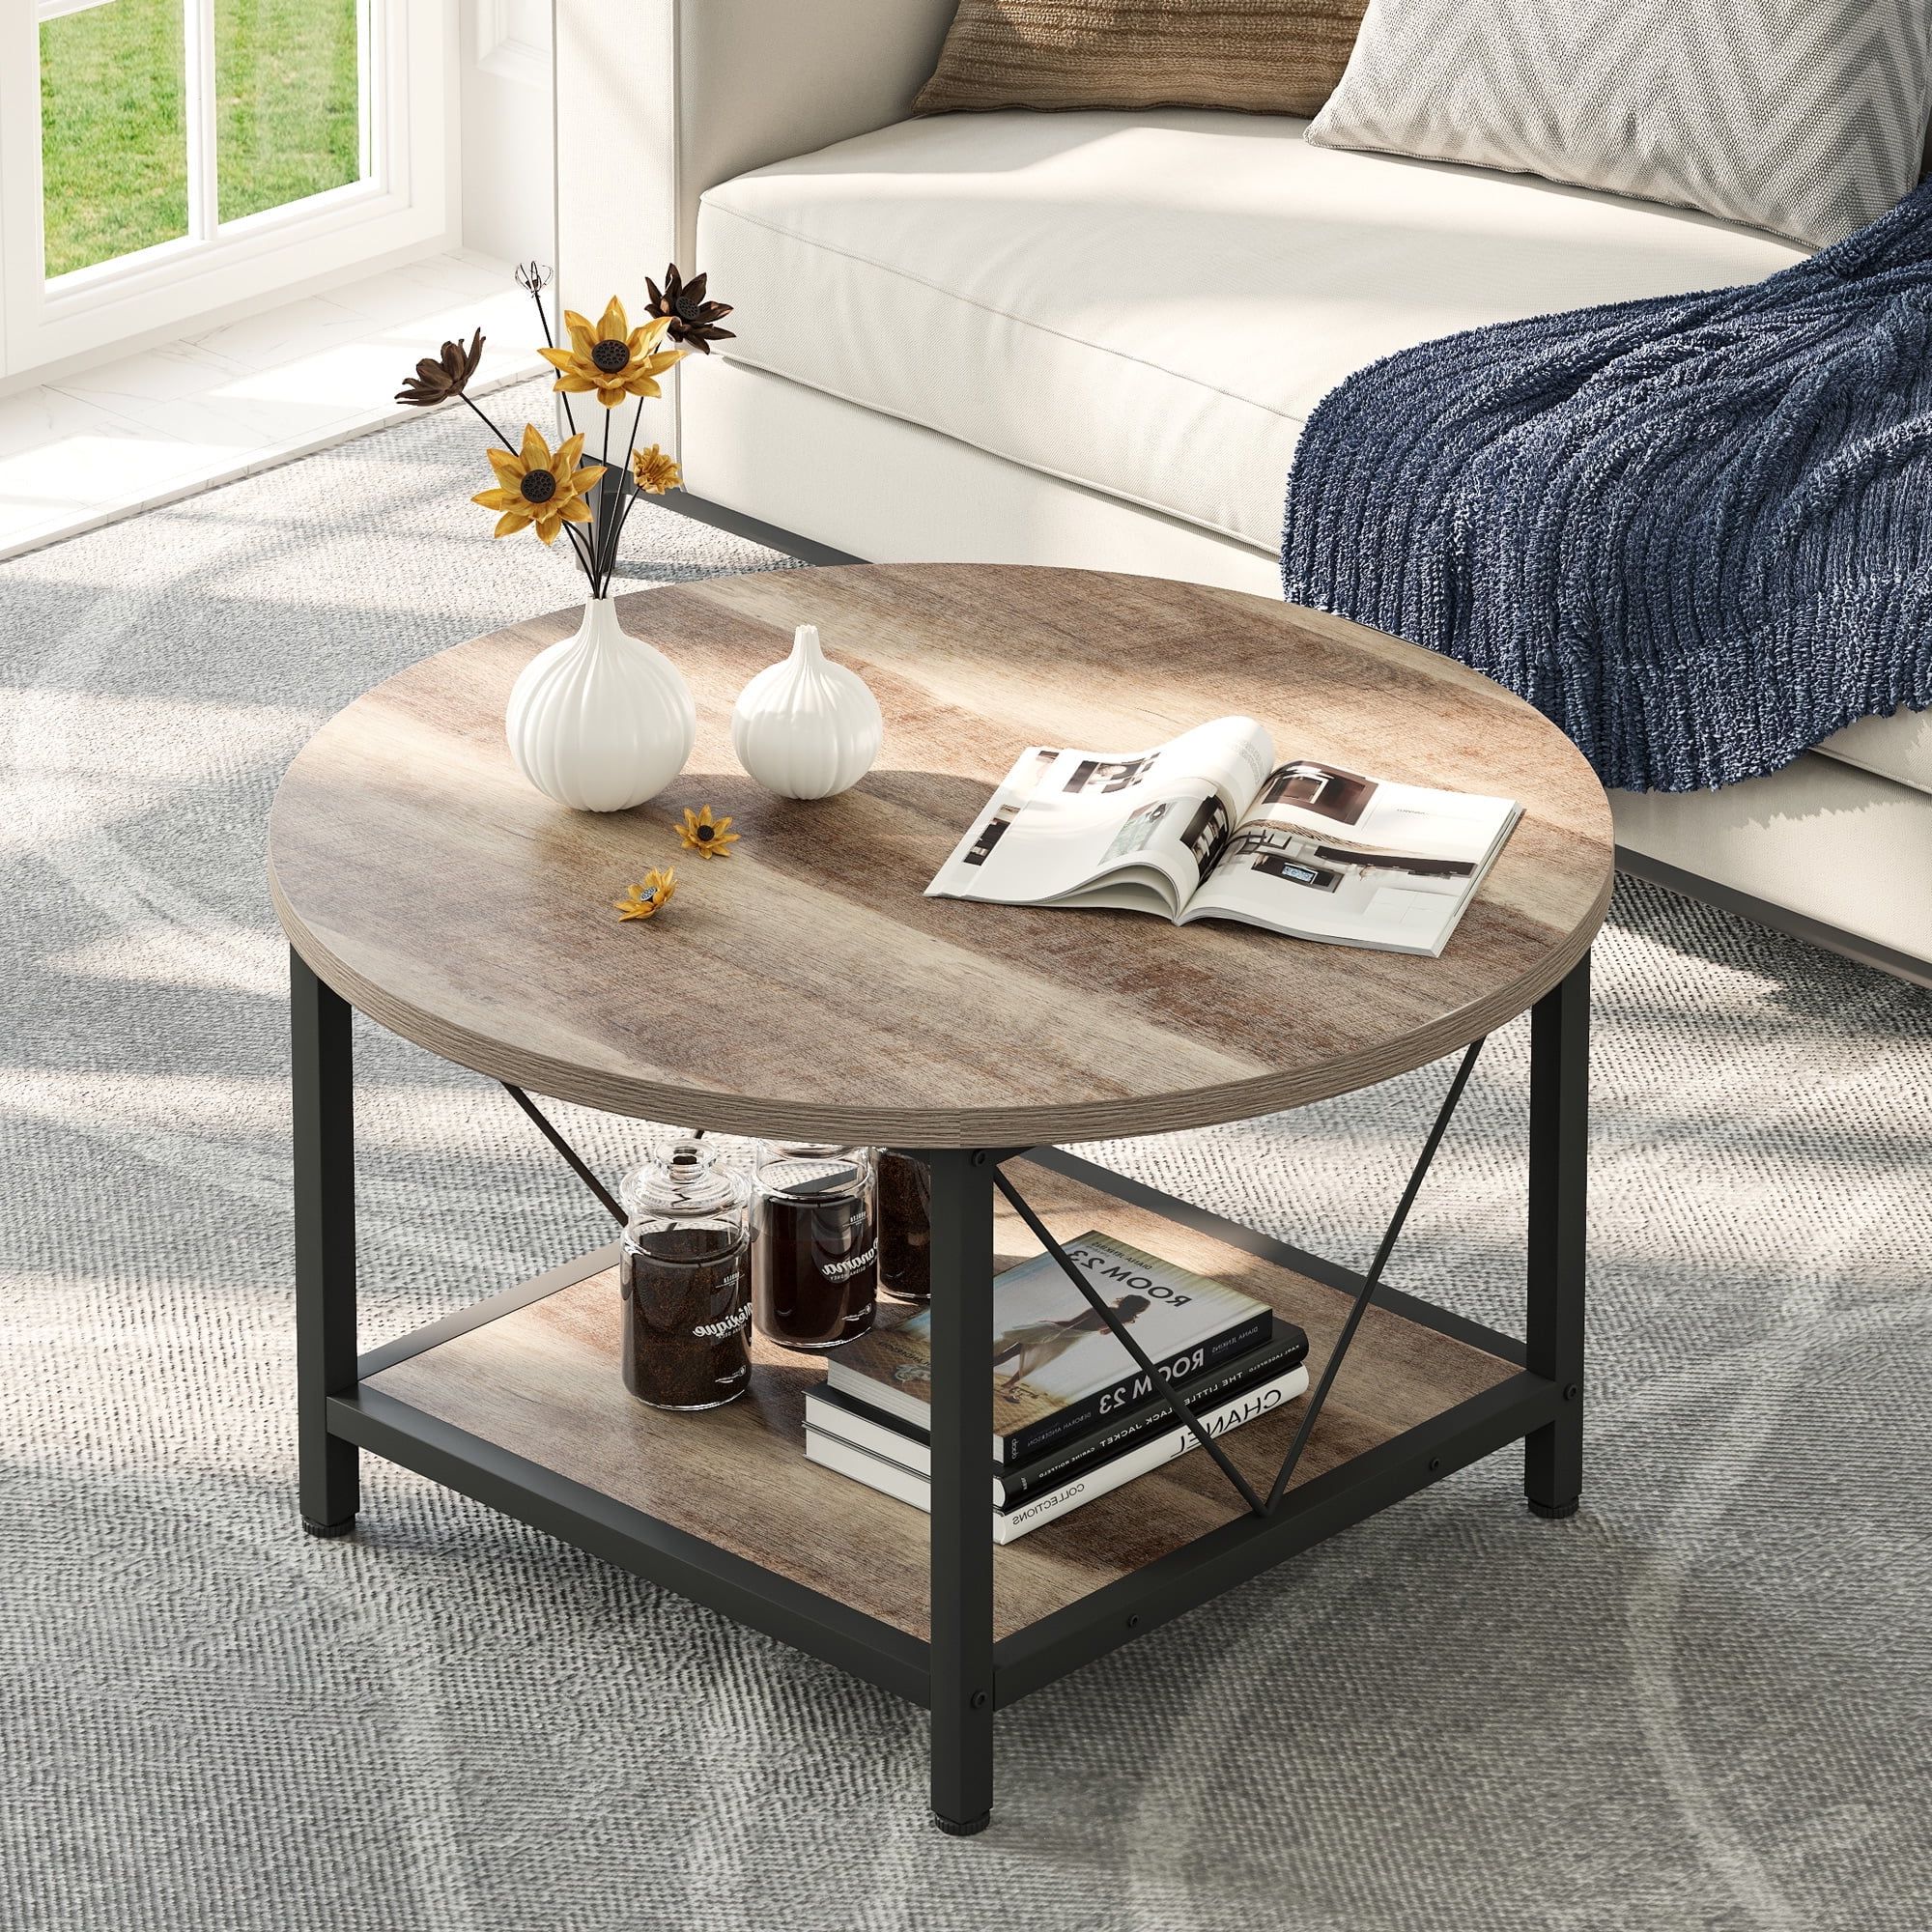 Dextrus Round Coffee Table With Storage, Rustic Living Room Tables With  Sturdy Metal Legs, Gray Wash – Walmart Throughout Most Recent Coffee Tables With Metal Legs (Photo 7 of 10)